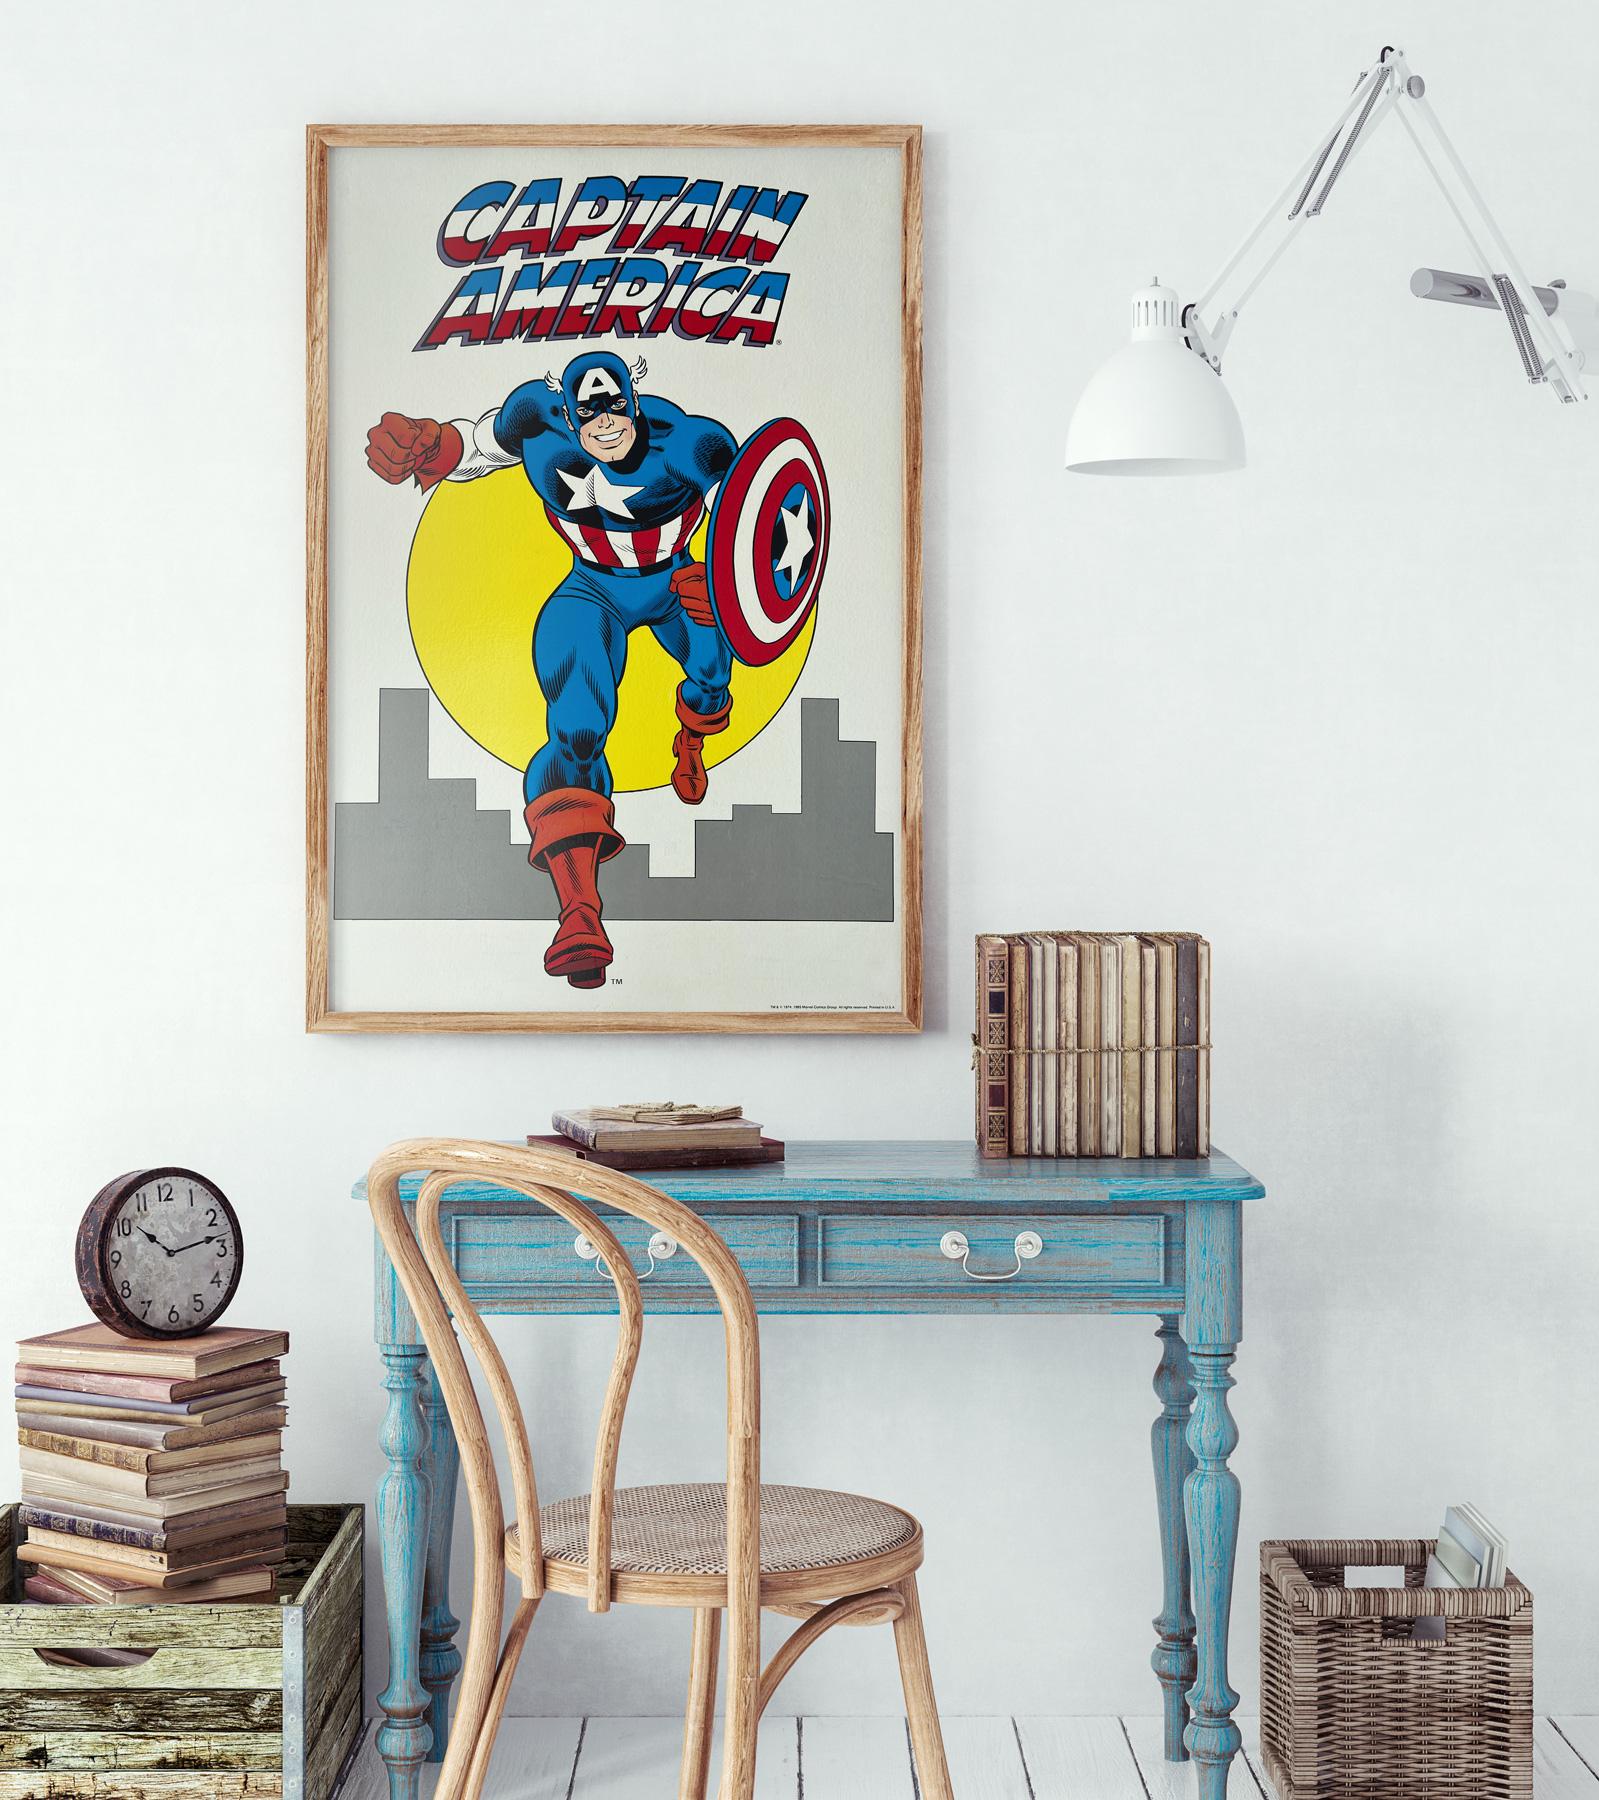 Wonderful vintage 1980s US poster from for Marvel's Captain America. Super design and very cool.

This vintage poster have been professionally cleaned, de-acidified and linen-backed and is sized 22 1/4 x 34 inches (23 1/2 x 35 inches including the